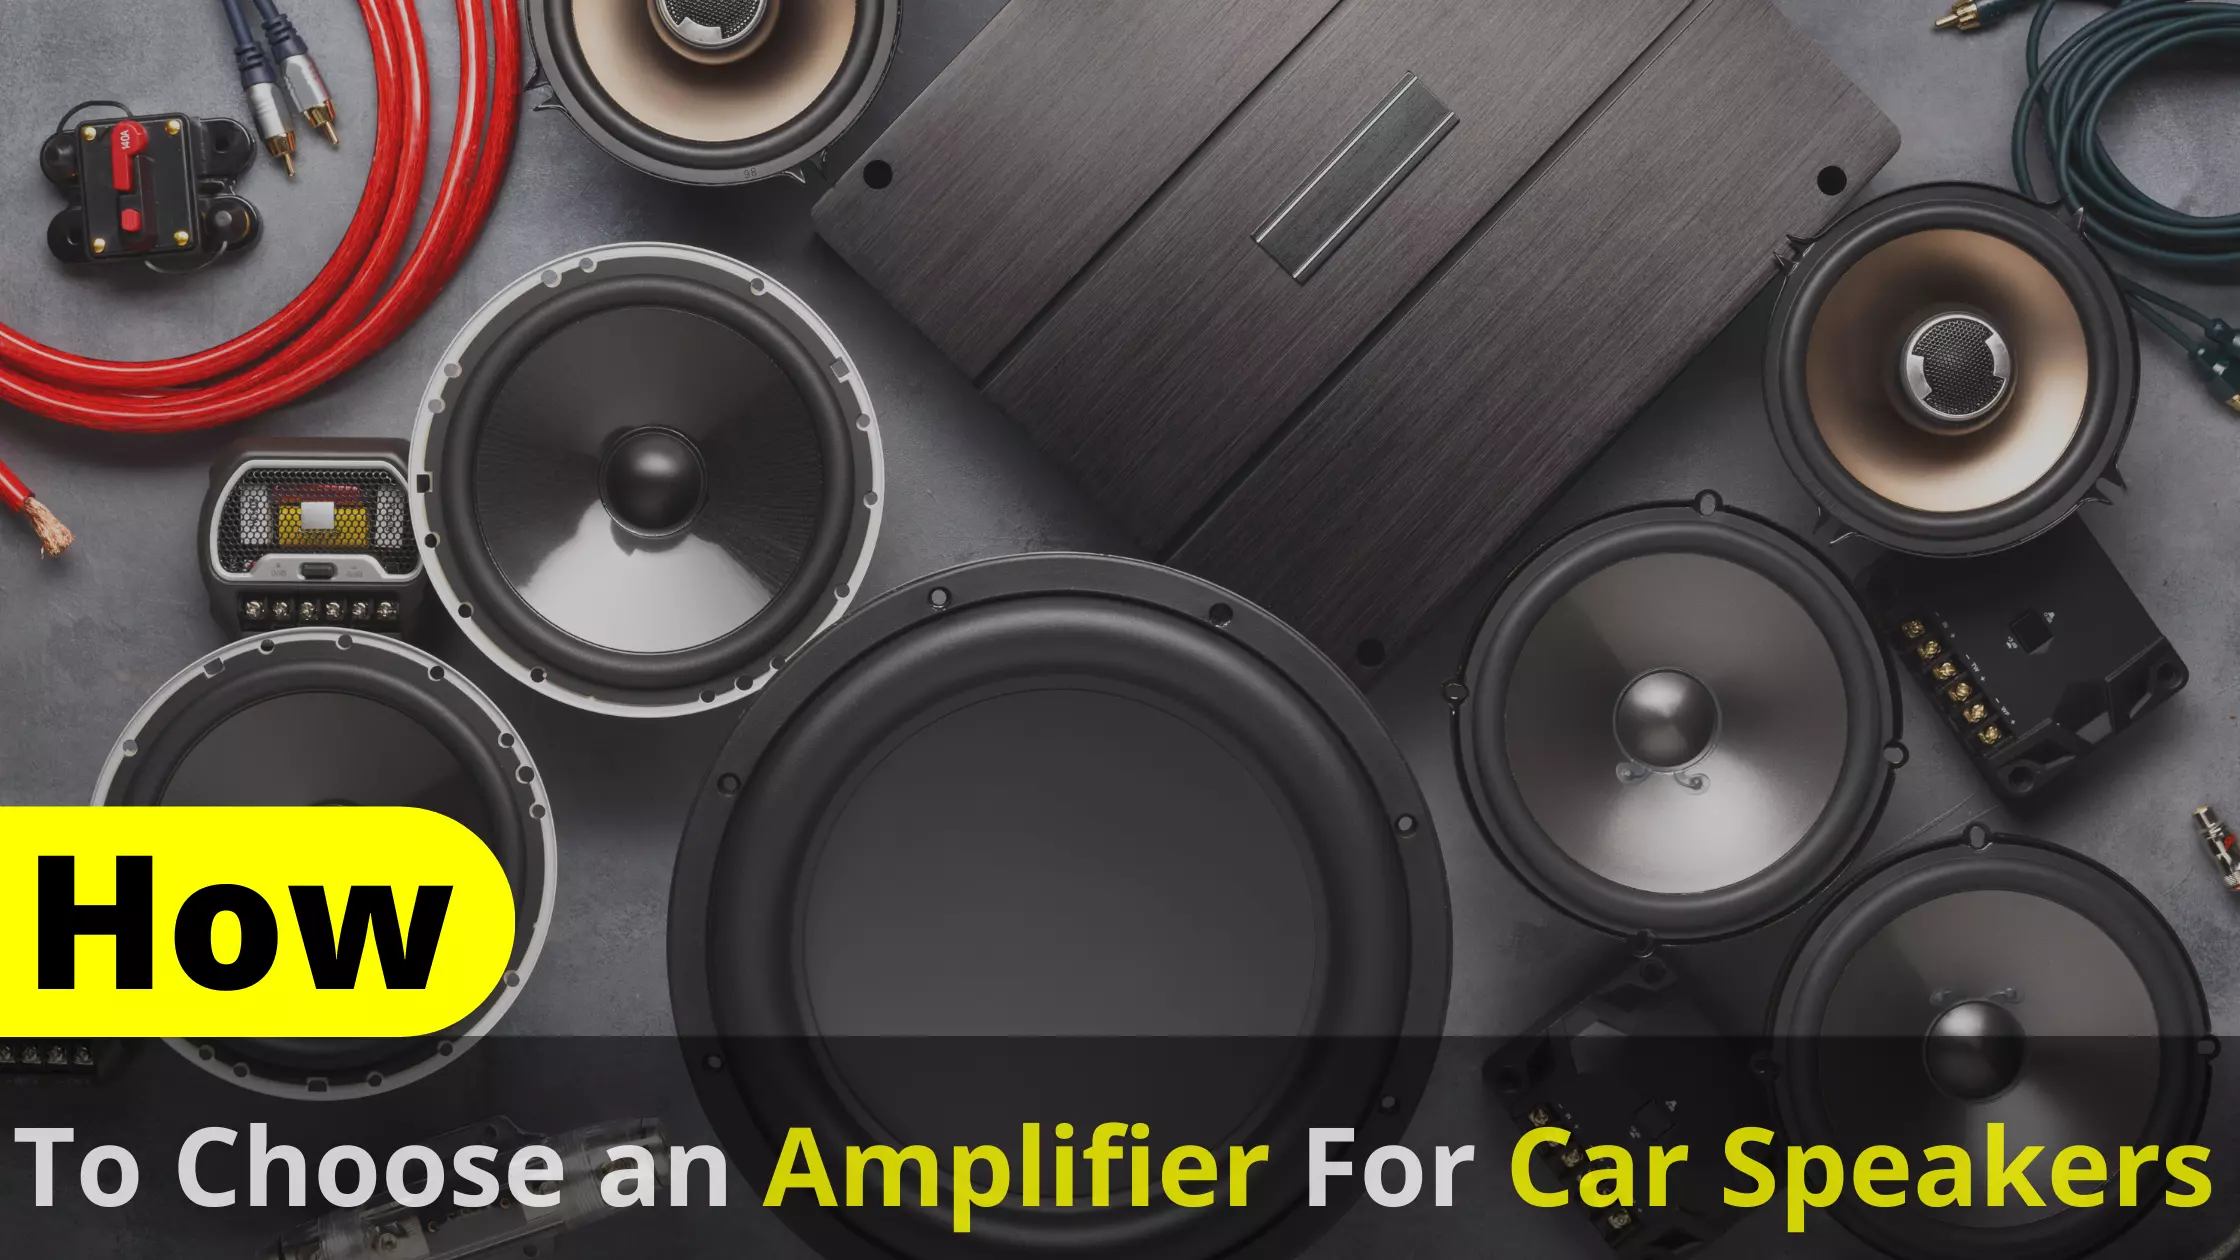 How To Choose An Amplifier For Car Speakers?